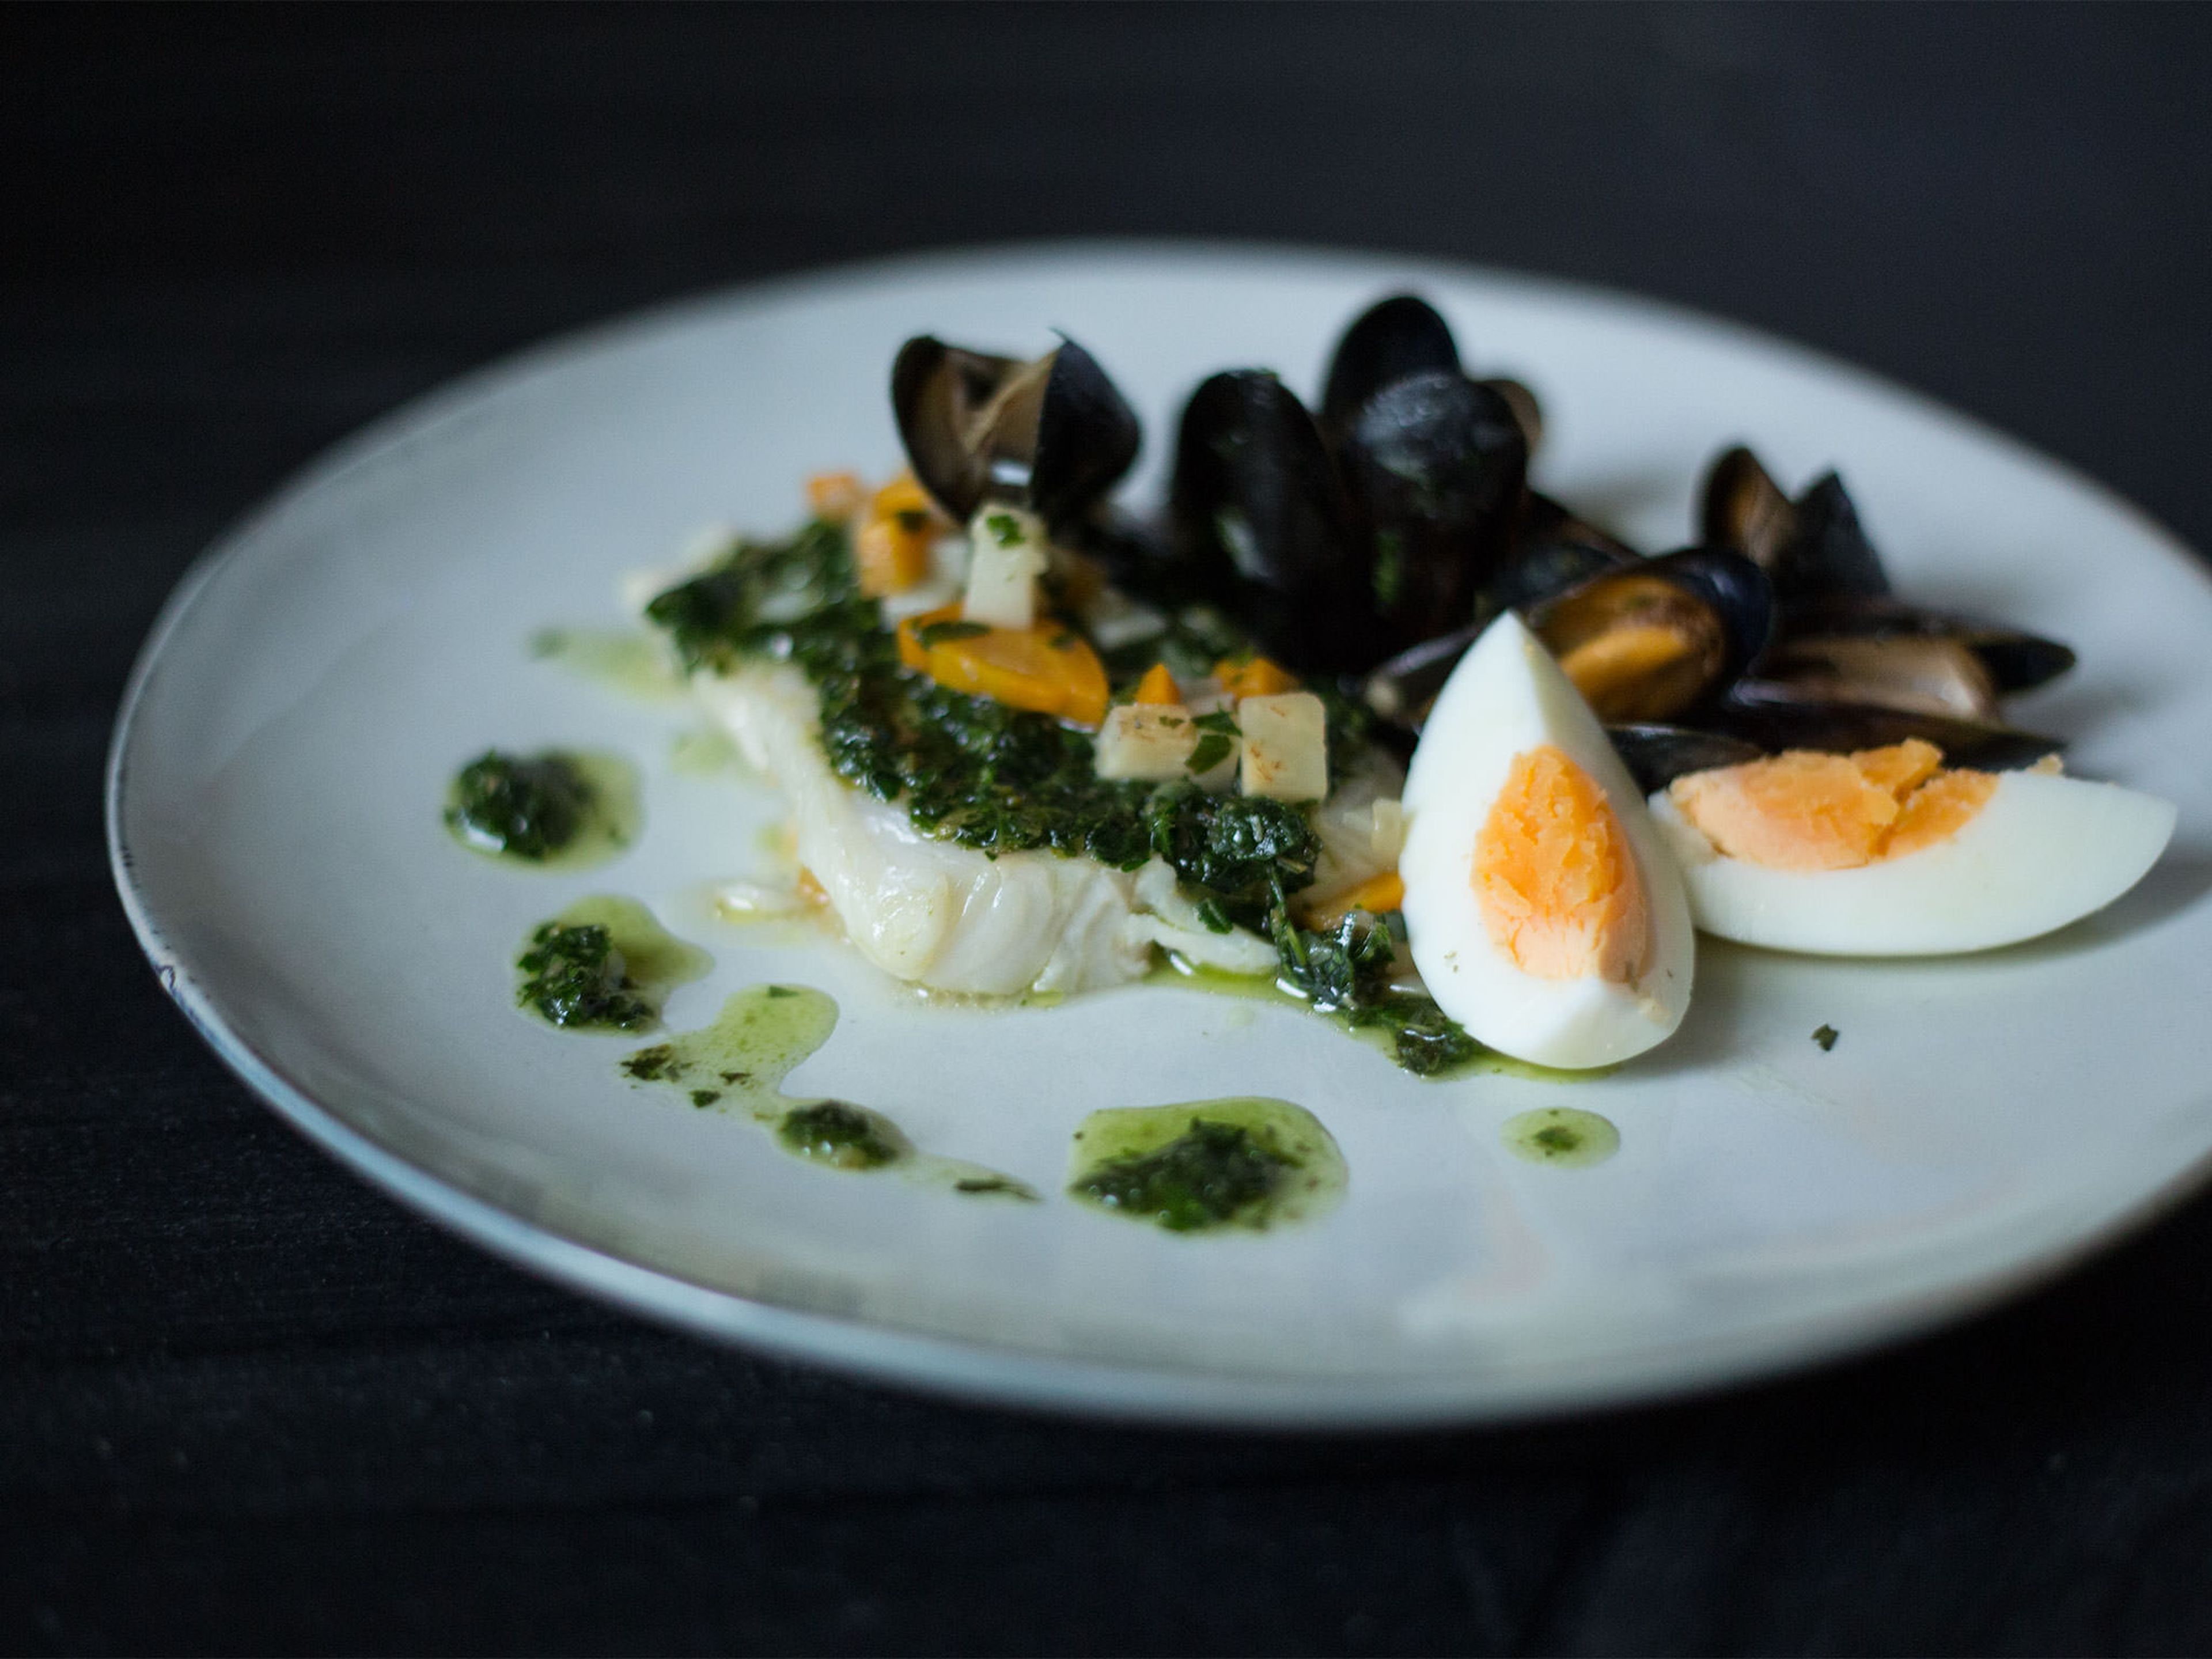 Shortly before the hake is cooked, add the mussels to the pan to warm before serving. To serve, pour over the salsa verde, quarter the hard-boiled eggs and arrange around the hake. Enjoy!